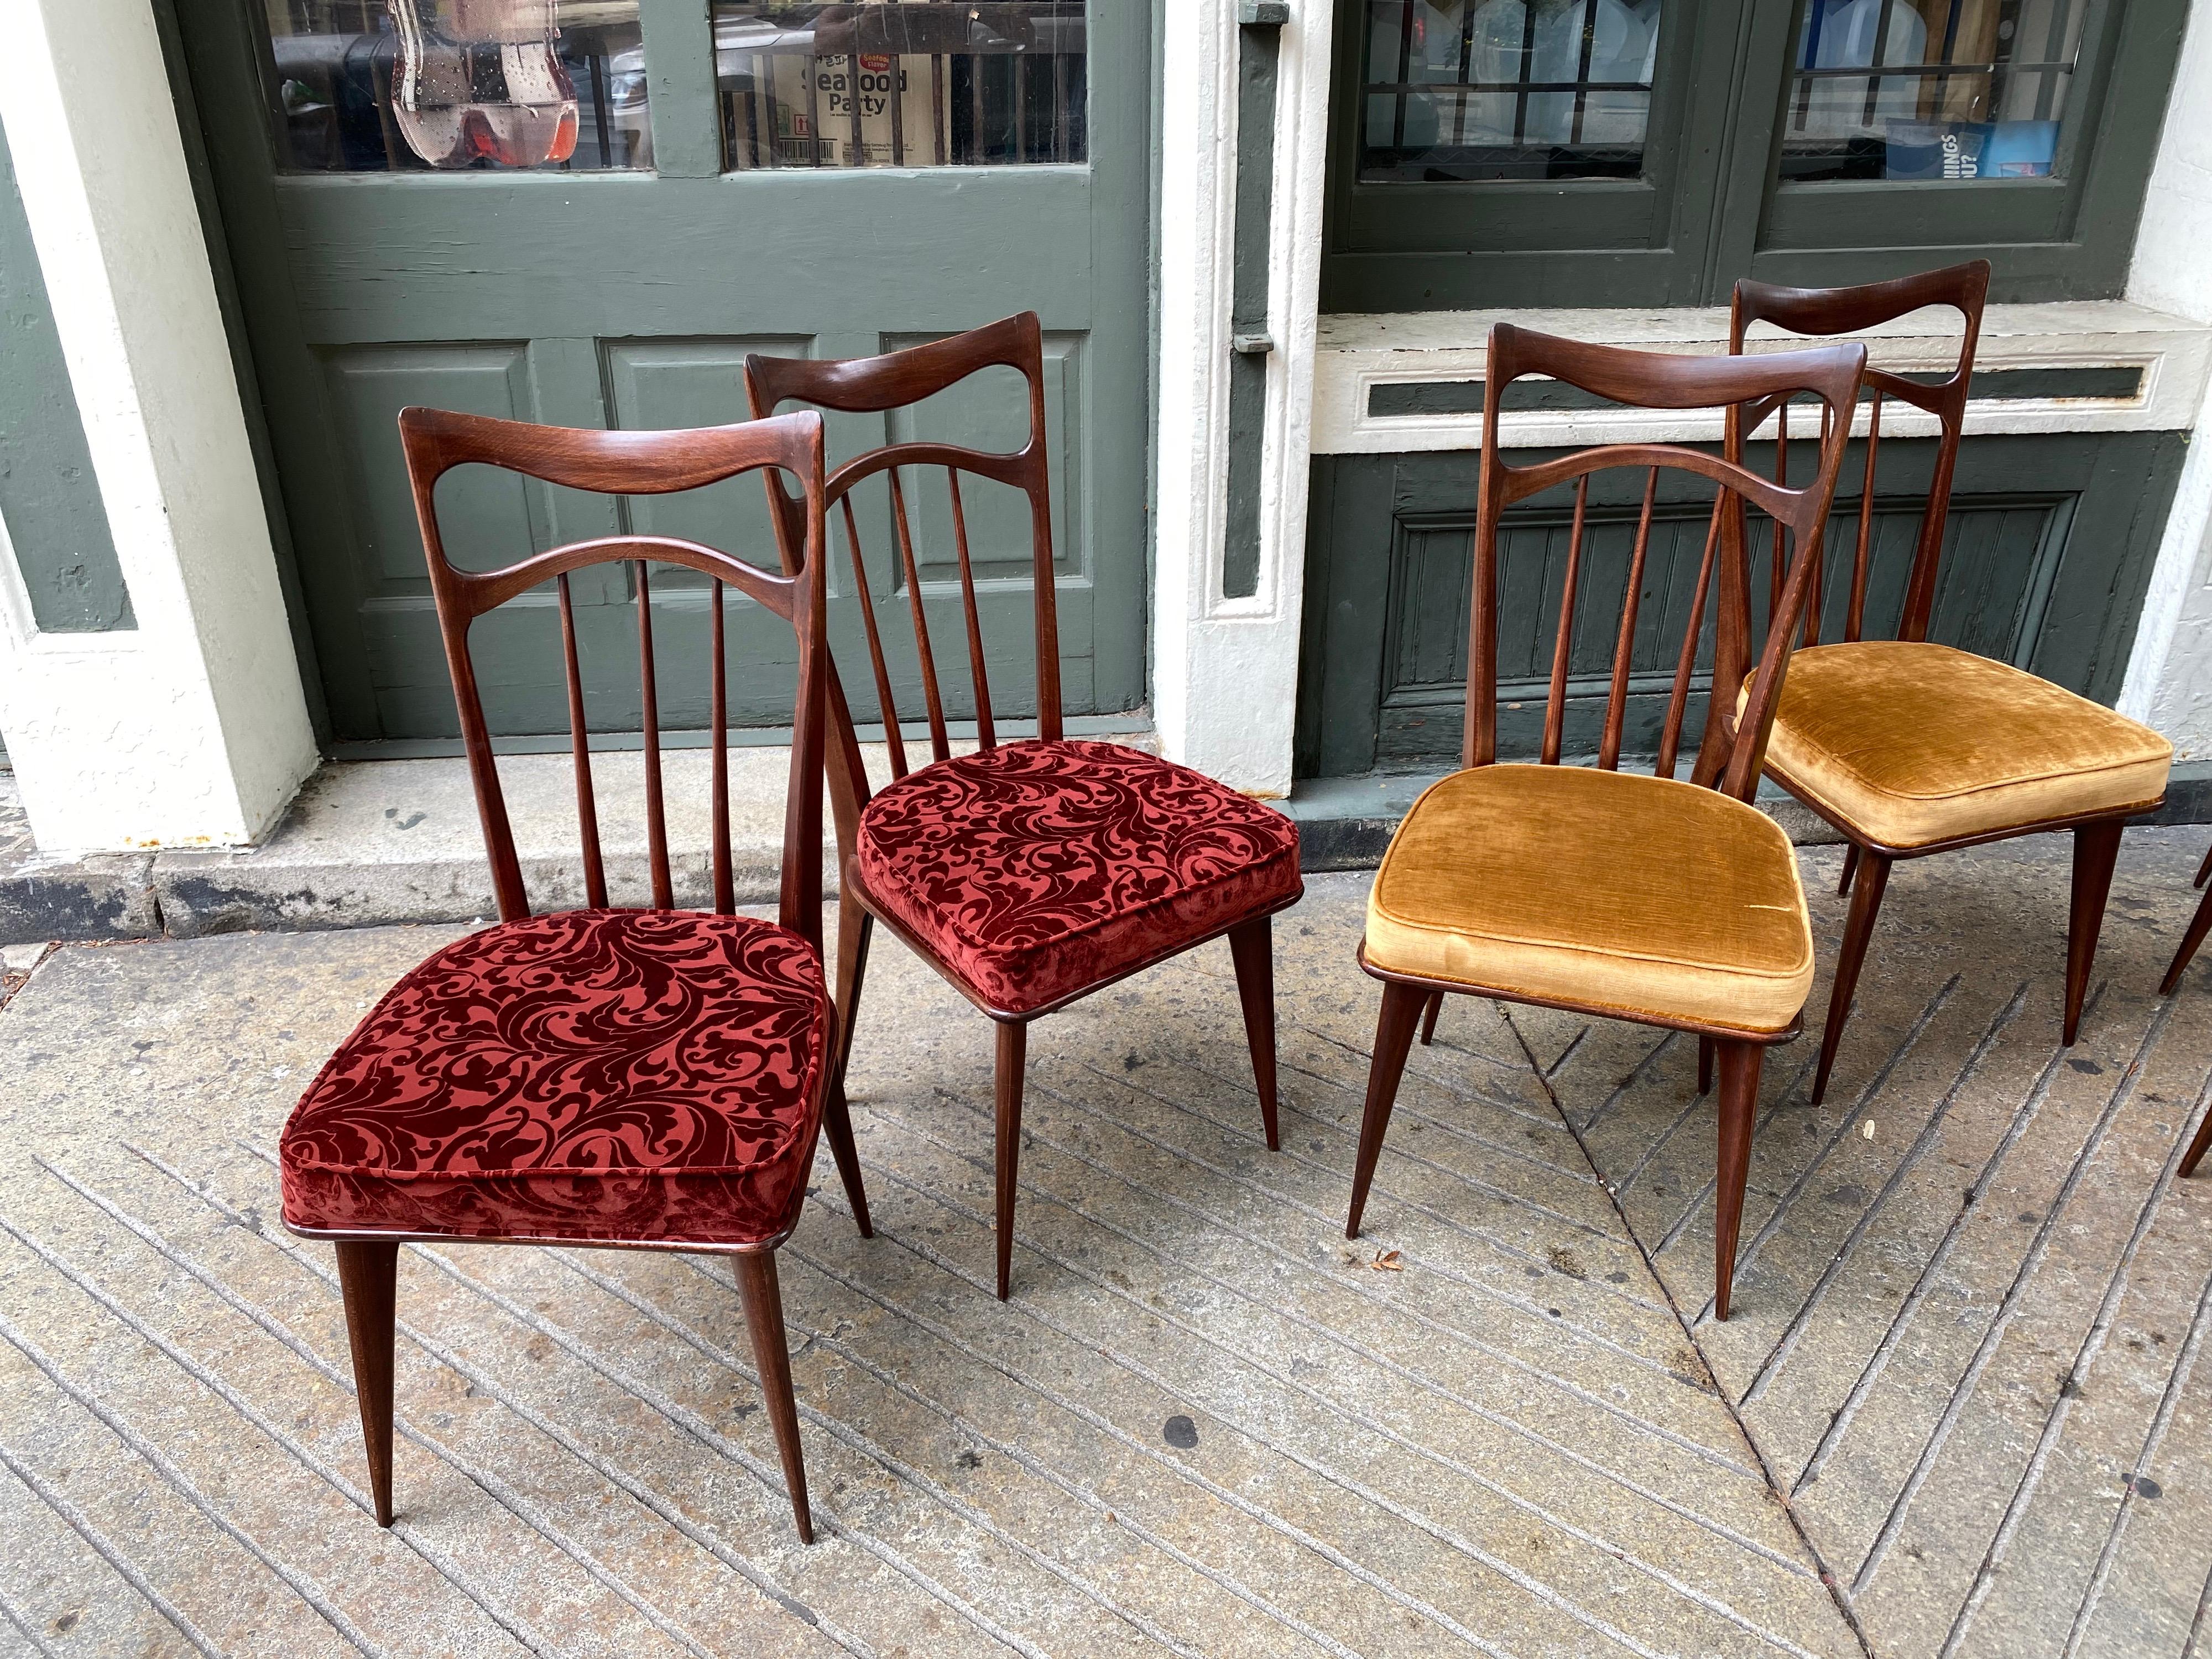 Set of 8 Italian dining chairs, darker walnut finish looks original. Backs have a Bowtie type design, nice thin legs gives the set a elegant look. 4 Chairs were reupholstered at some point where as 4 I believe are Original. Easy redo to make them